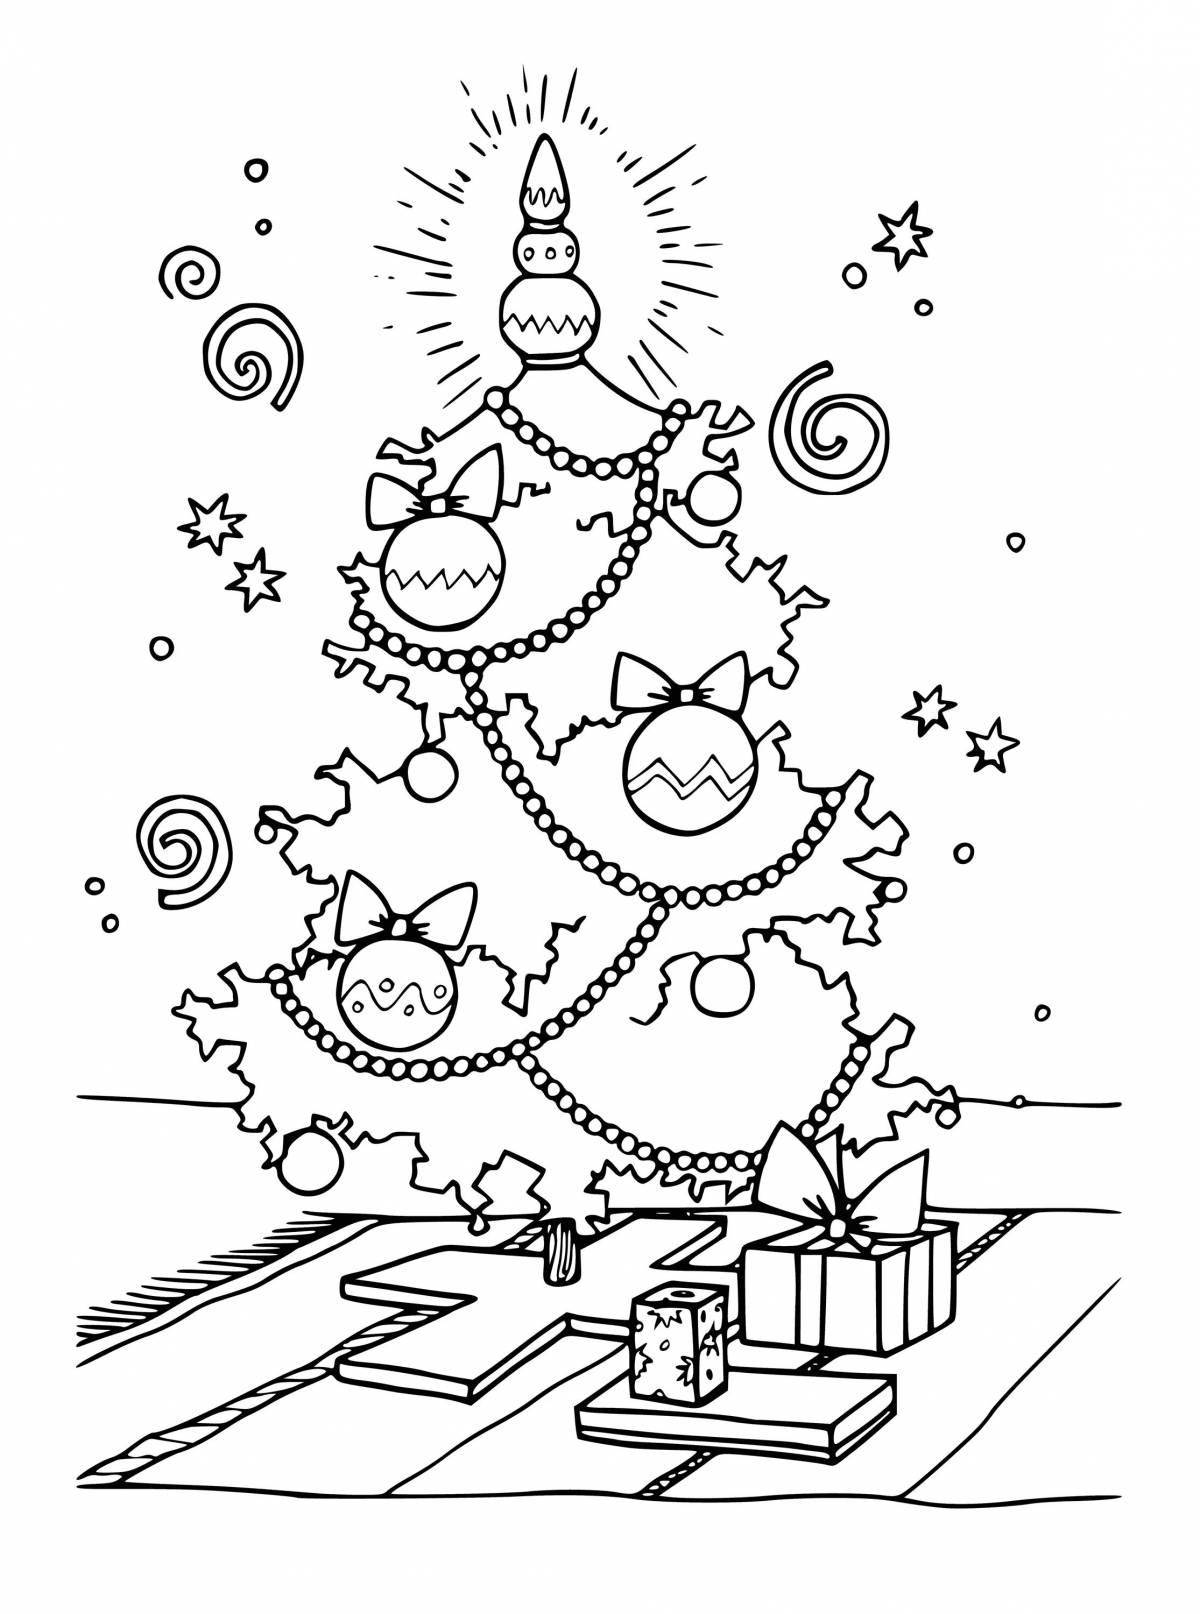 Fantastic Christmas tree coloring book for 6-7 year olds